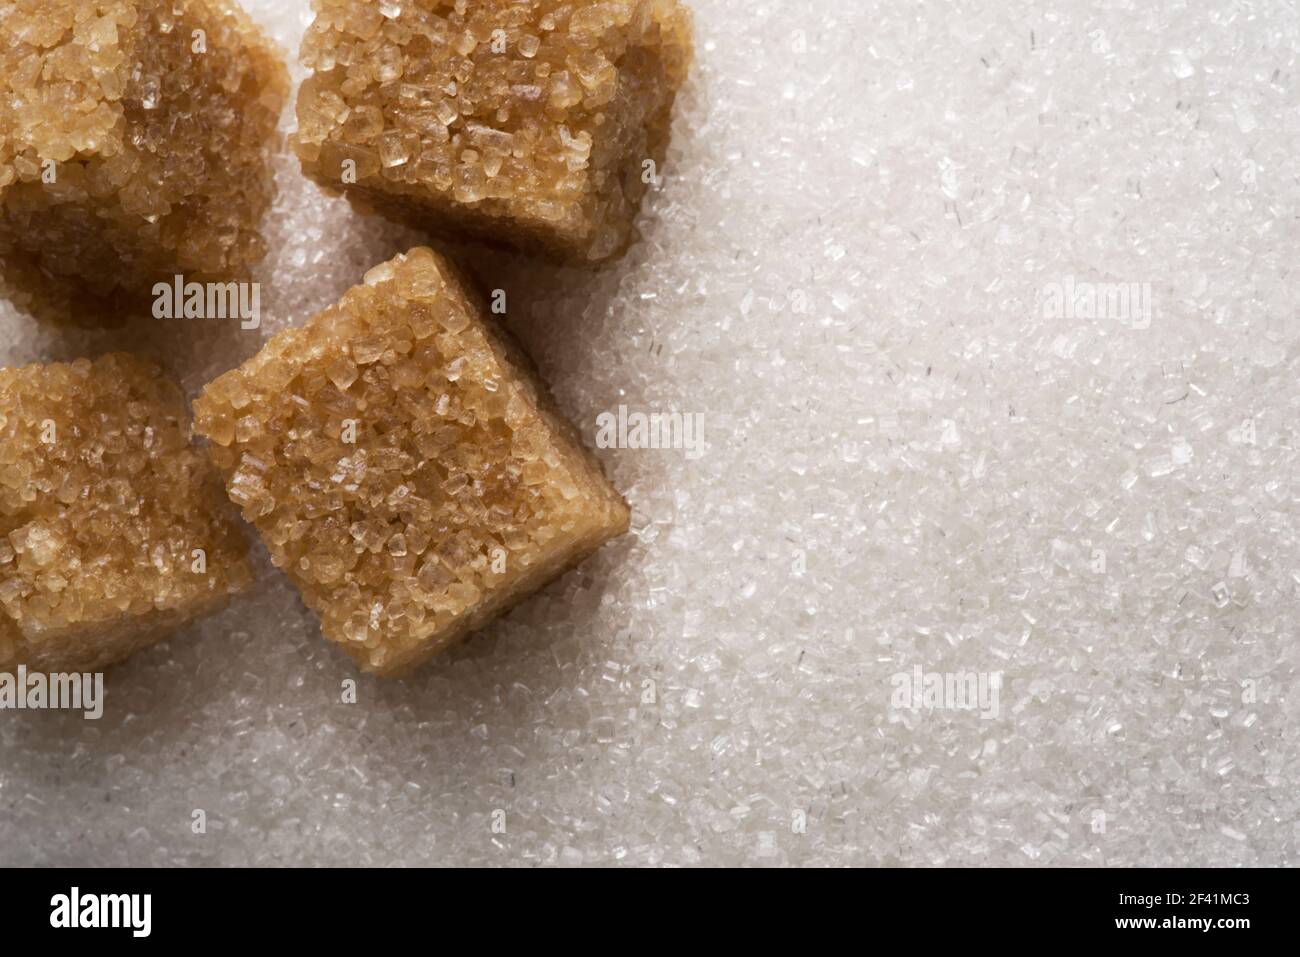 White refined sugar granules and brown sugar cubes close-up. Food background. Stock Photo